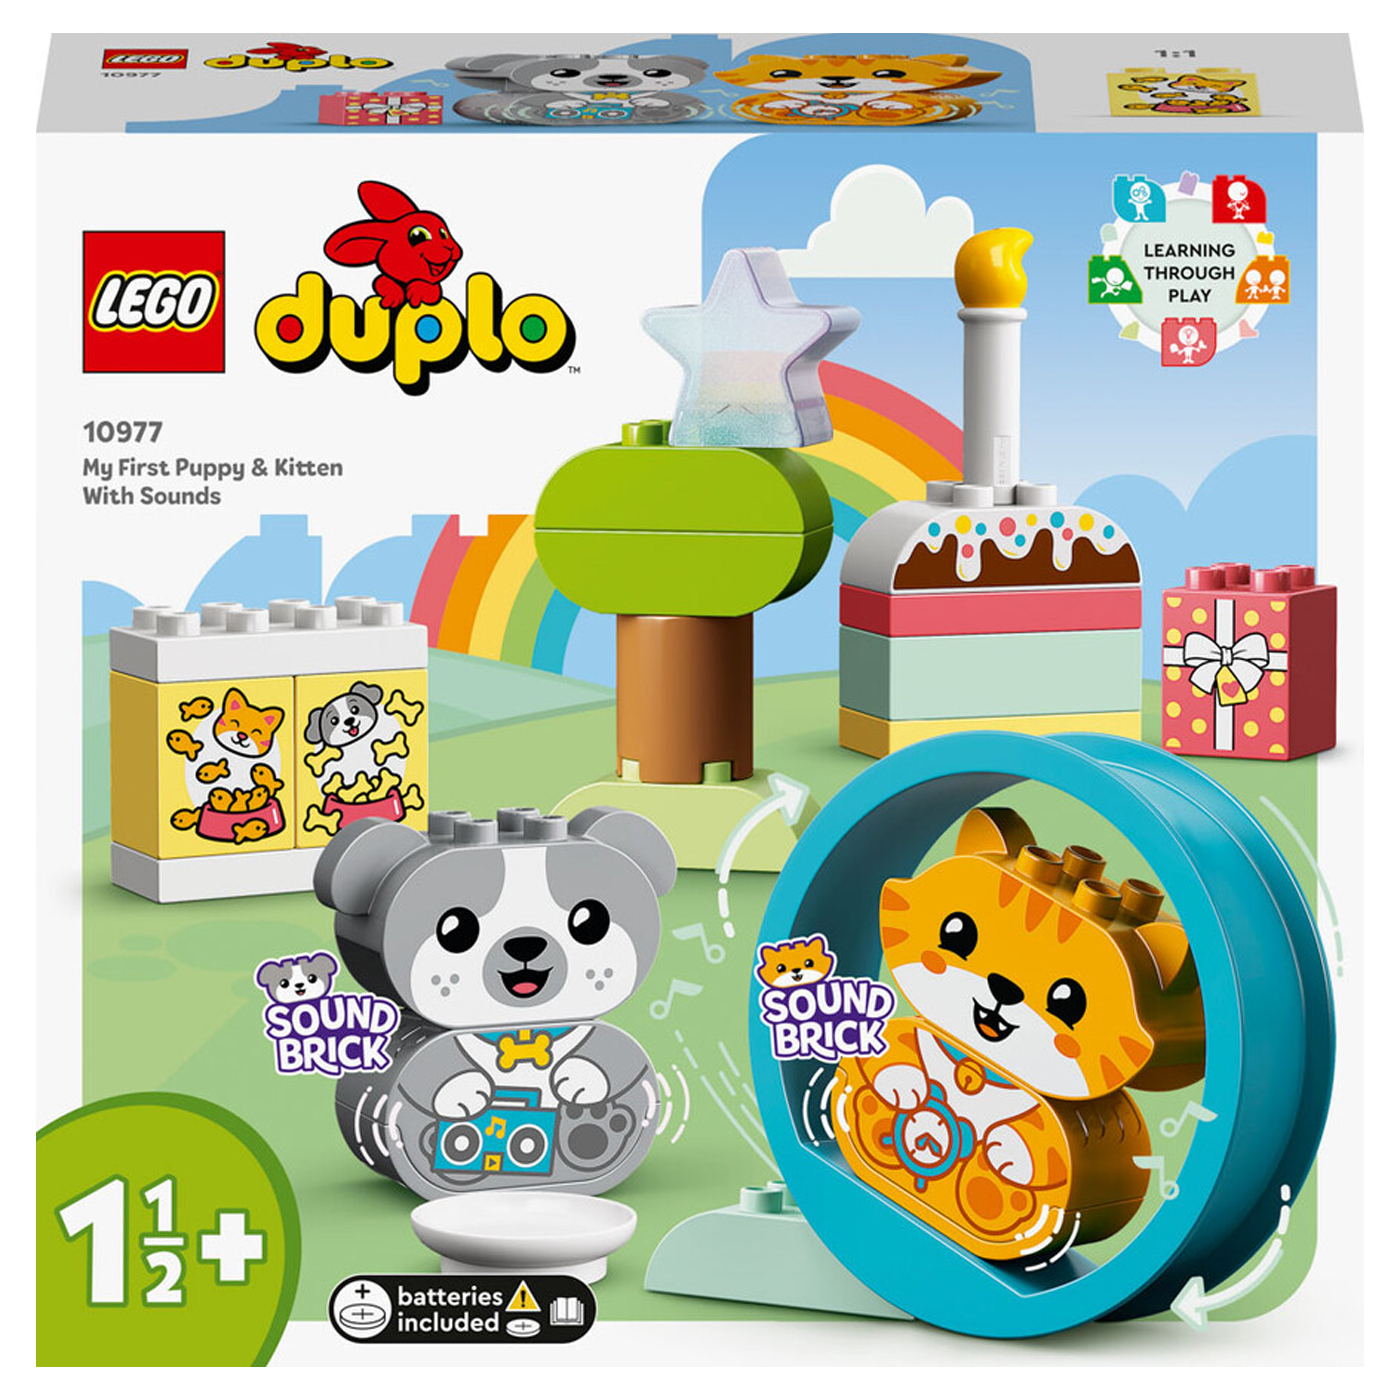 LEGO Lego Duplo Puppy And Kitten Sounds